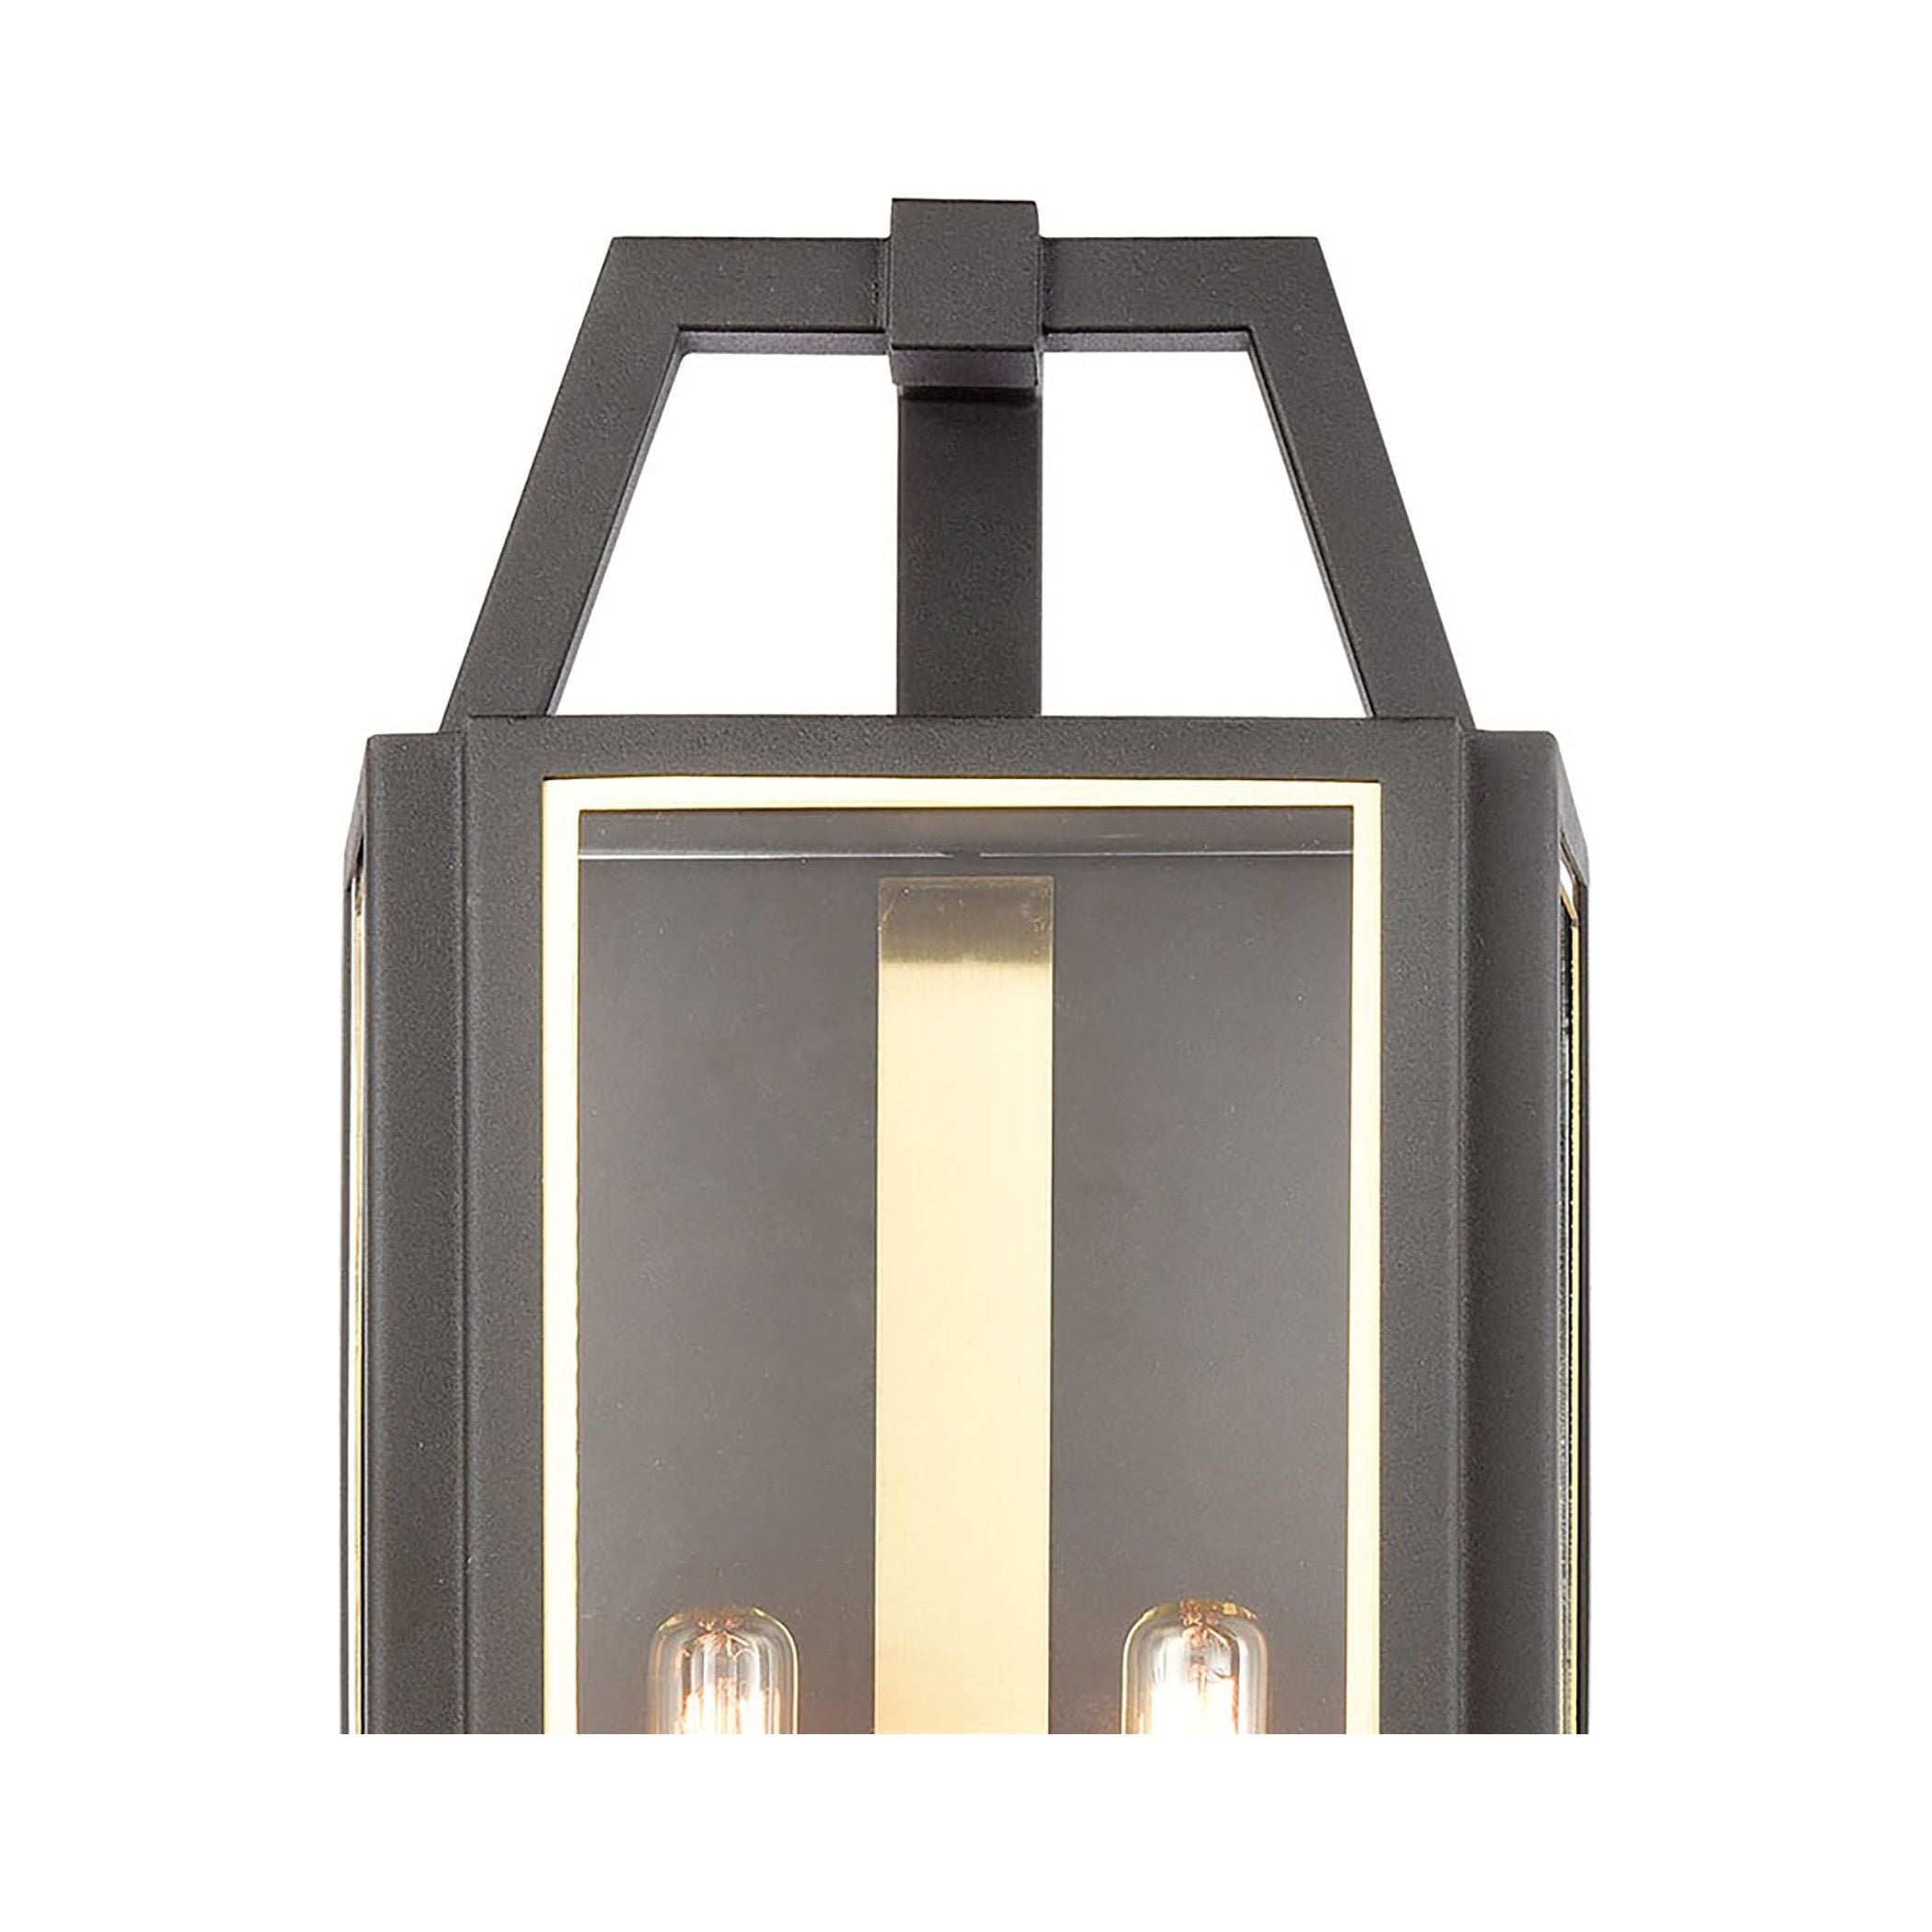 Portico 21" High 2-Light Outdoor Sconce